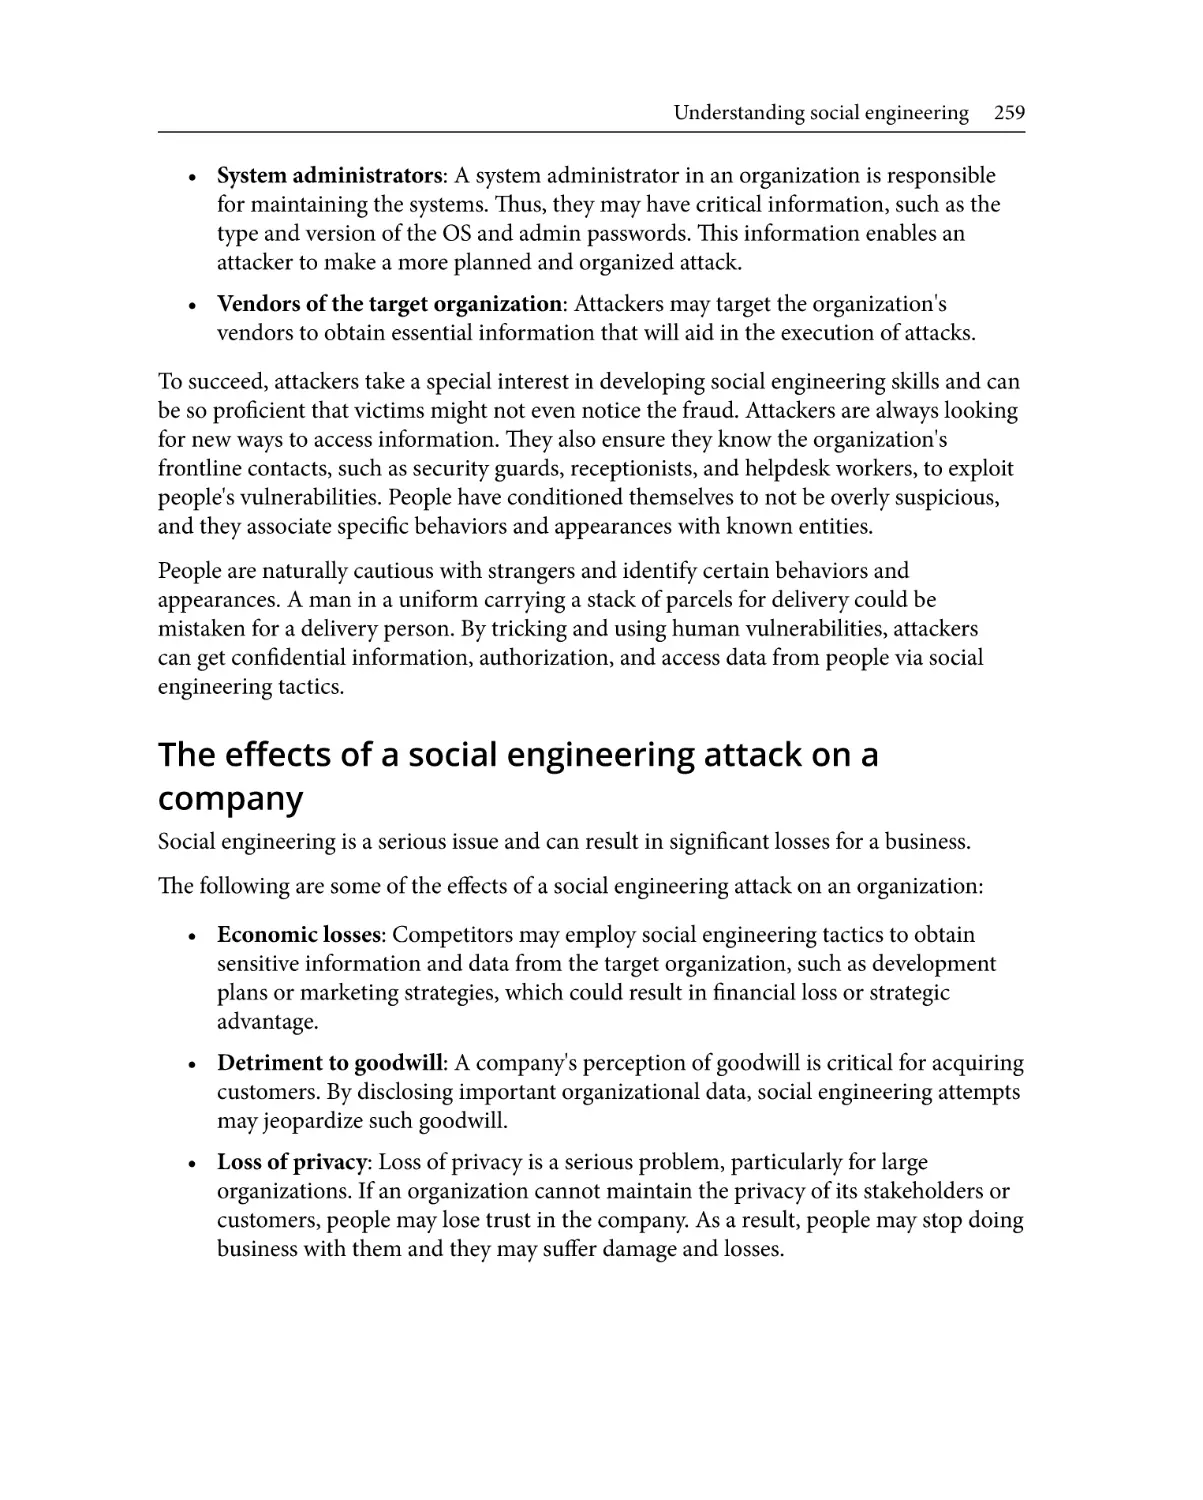 The effects of a social engineering attack on a company